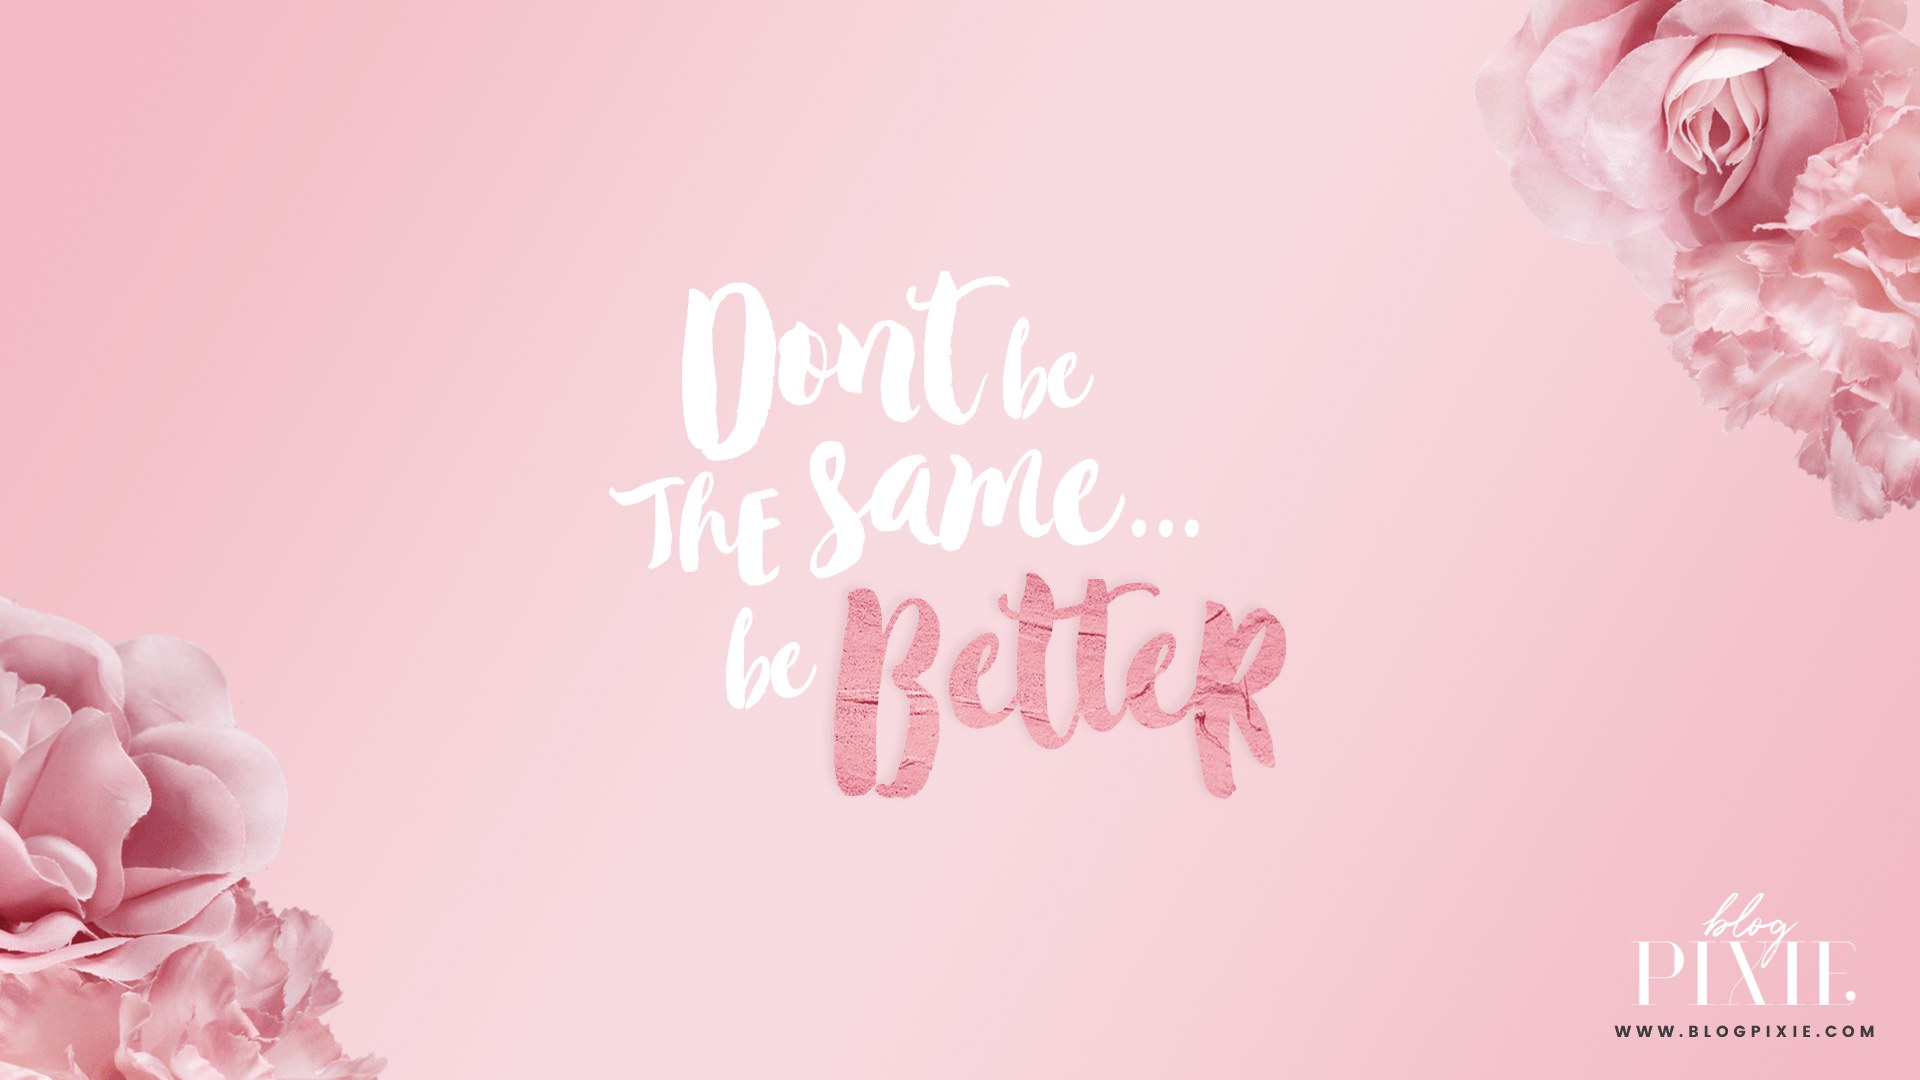 Don't Be The Same... Be Better Wallpaper, Rose Gold - Wallpaperforu